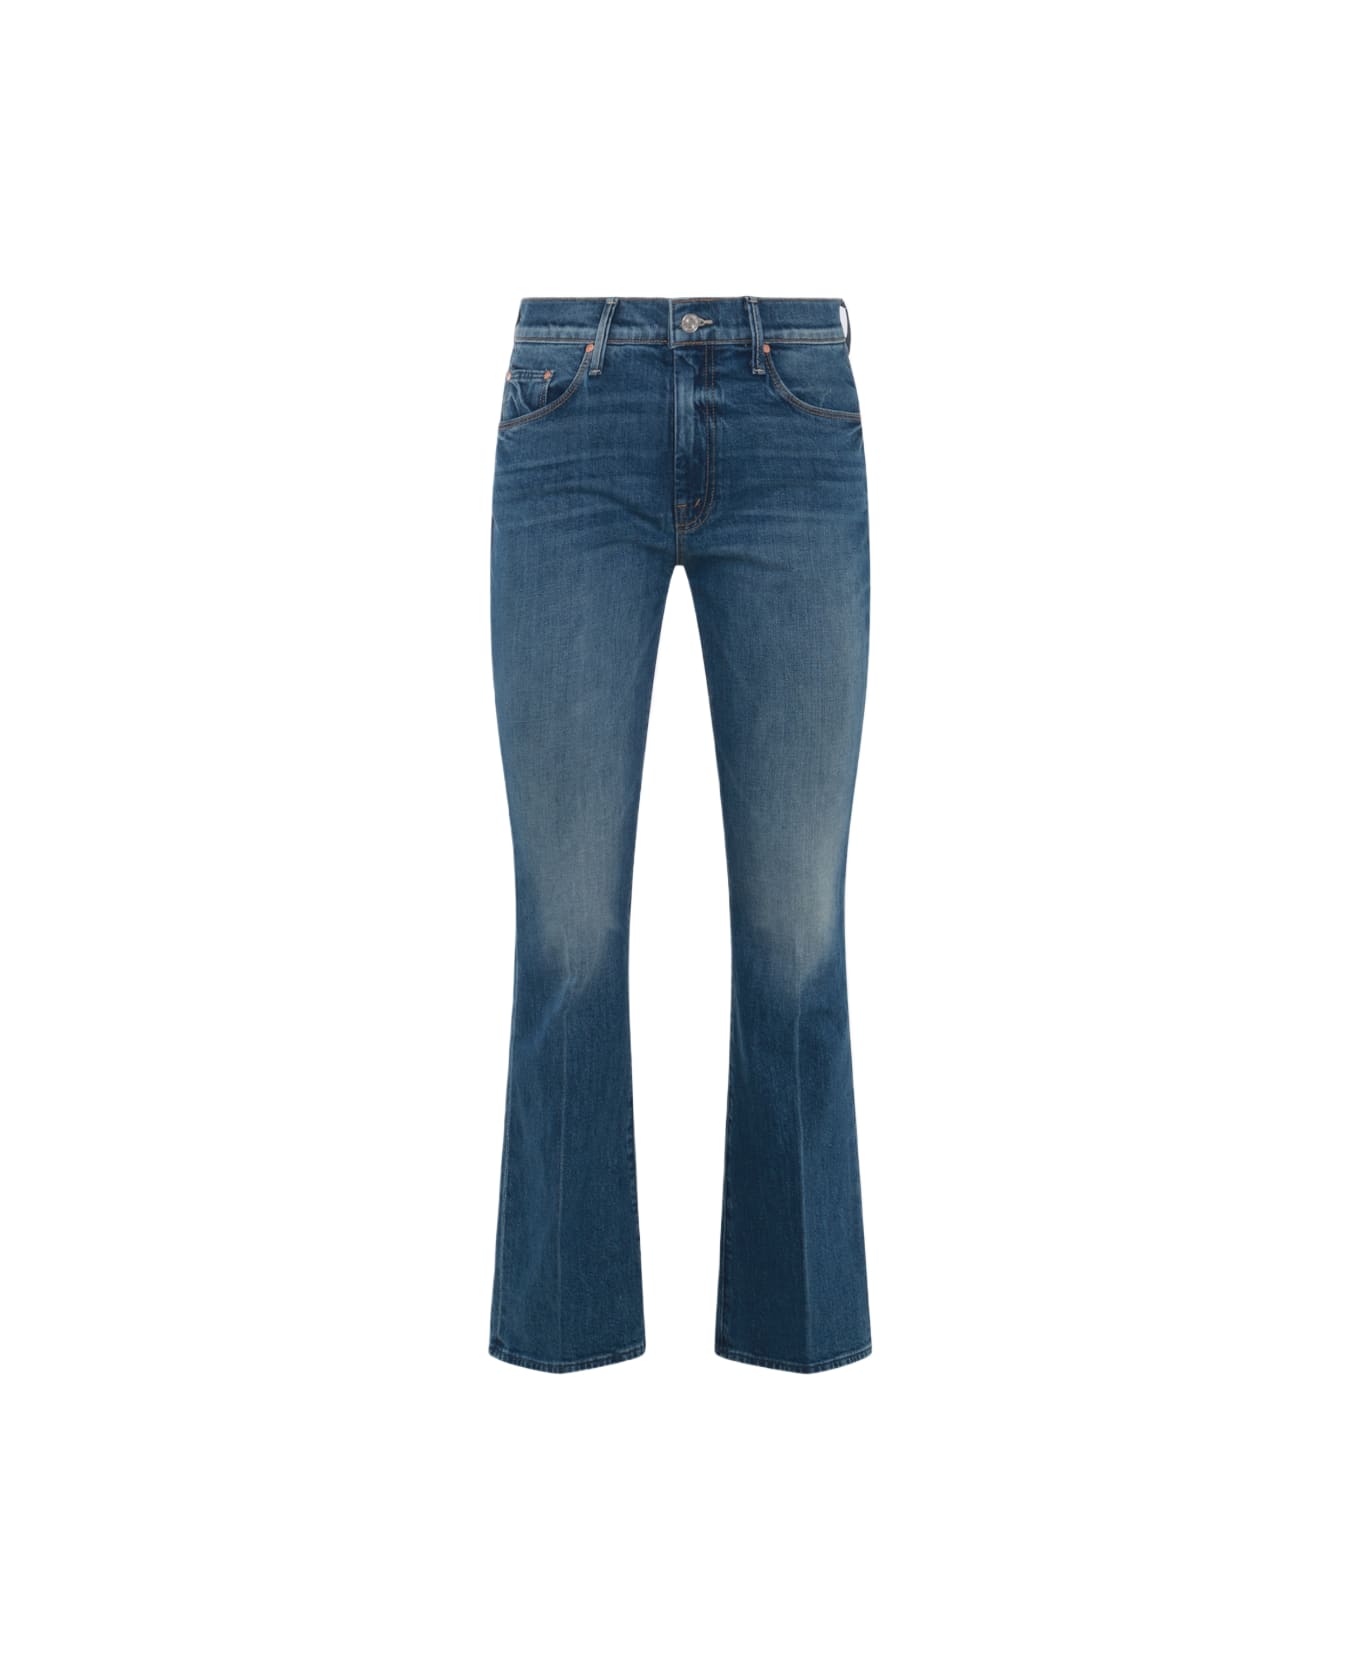 Mother Dark Blue Cotton Blend Jeans - ITS A SMALL WORLD